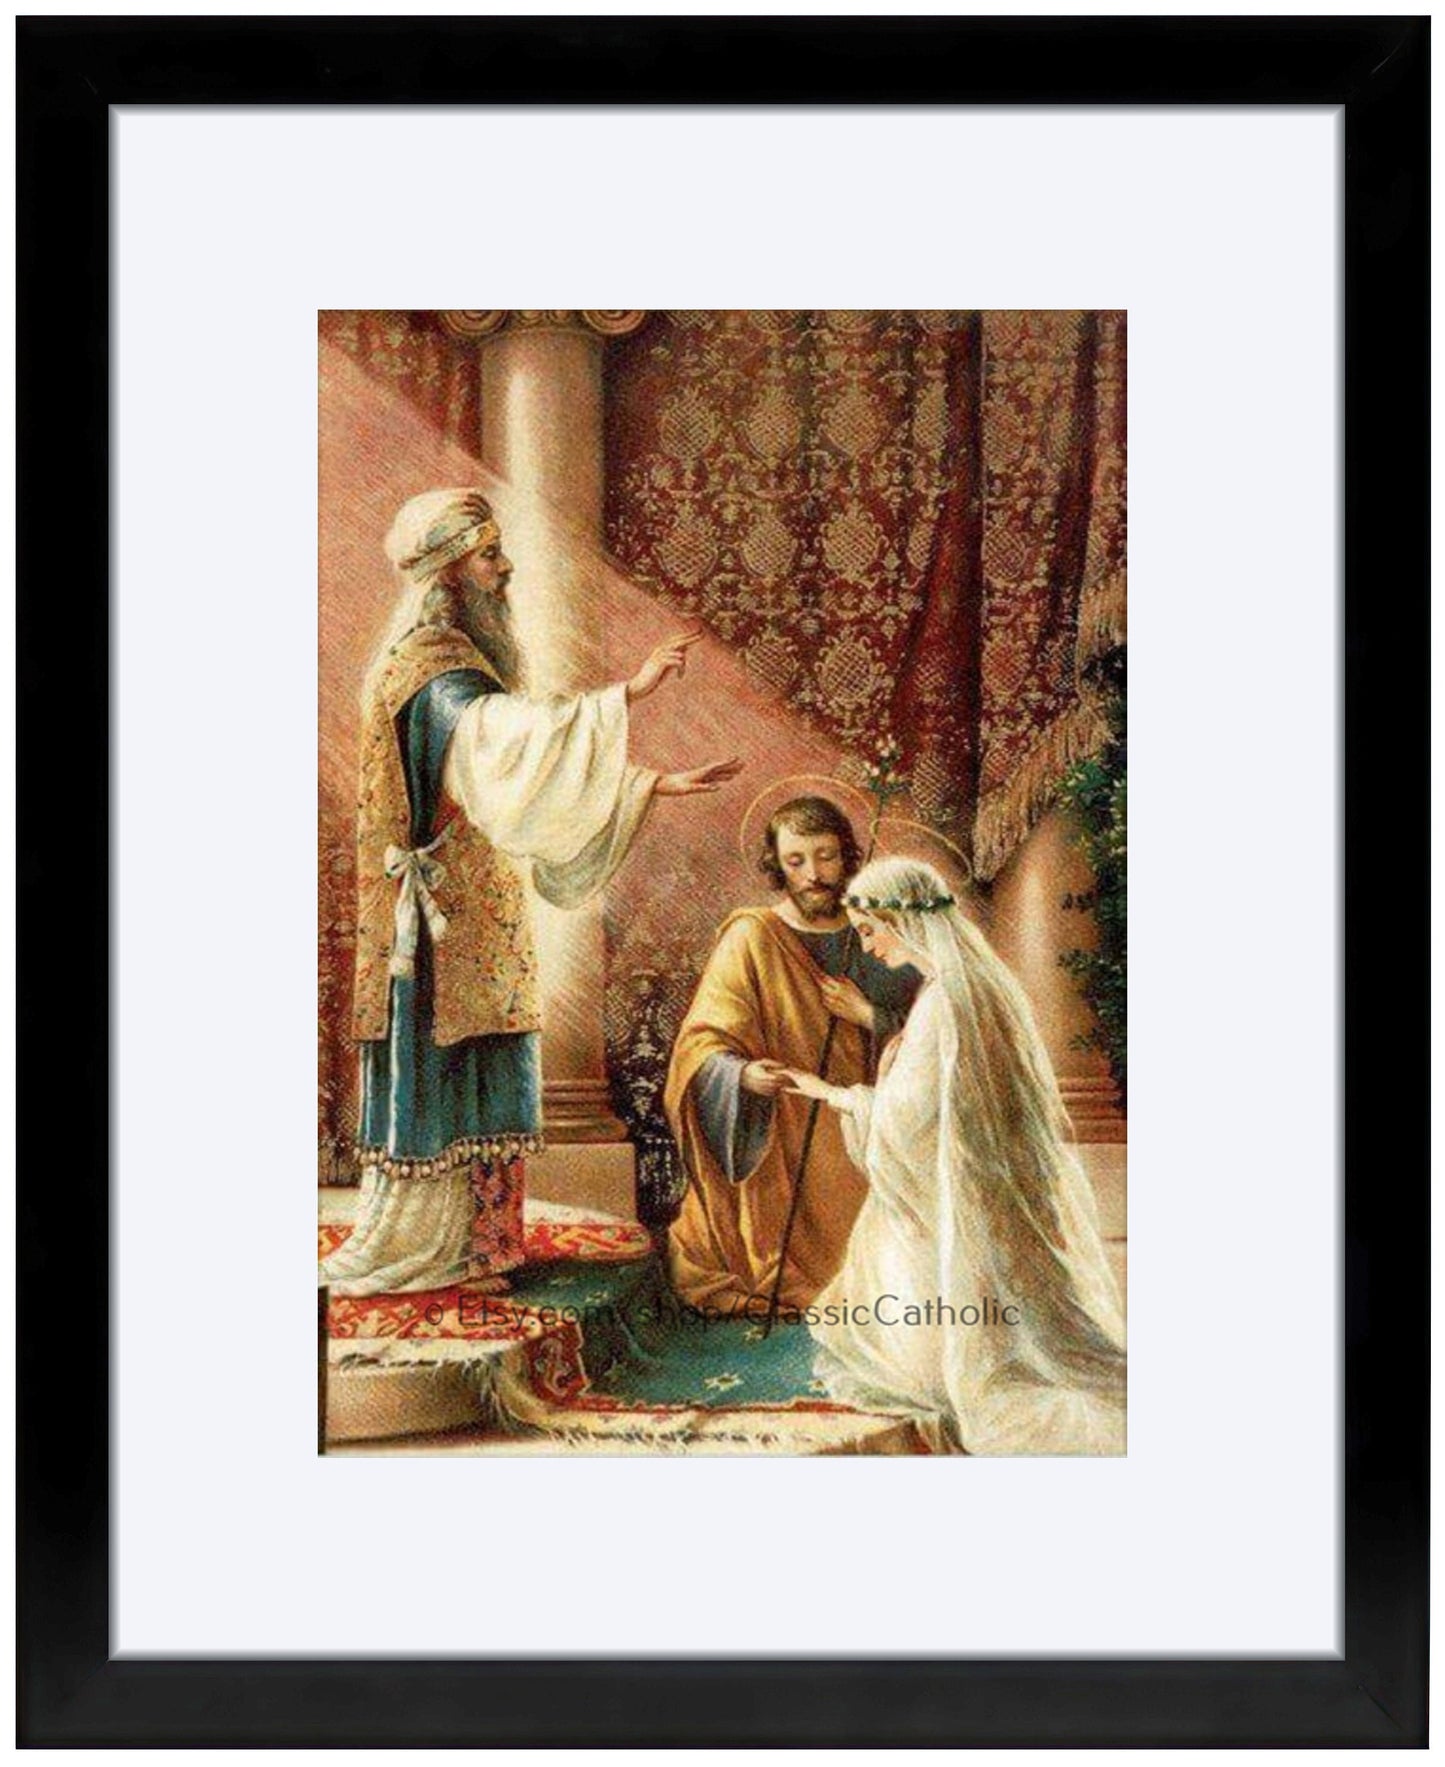 Wedding of Joseph and Mary – 3 Sizes – Wedding Gift/Anniversary Gift – based on a Vintage Holy Card – Catholic Art Print – Archival Quality